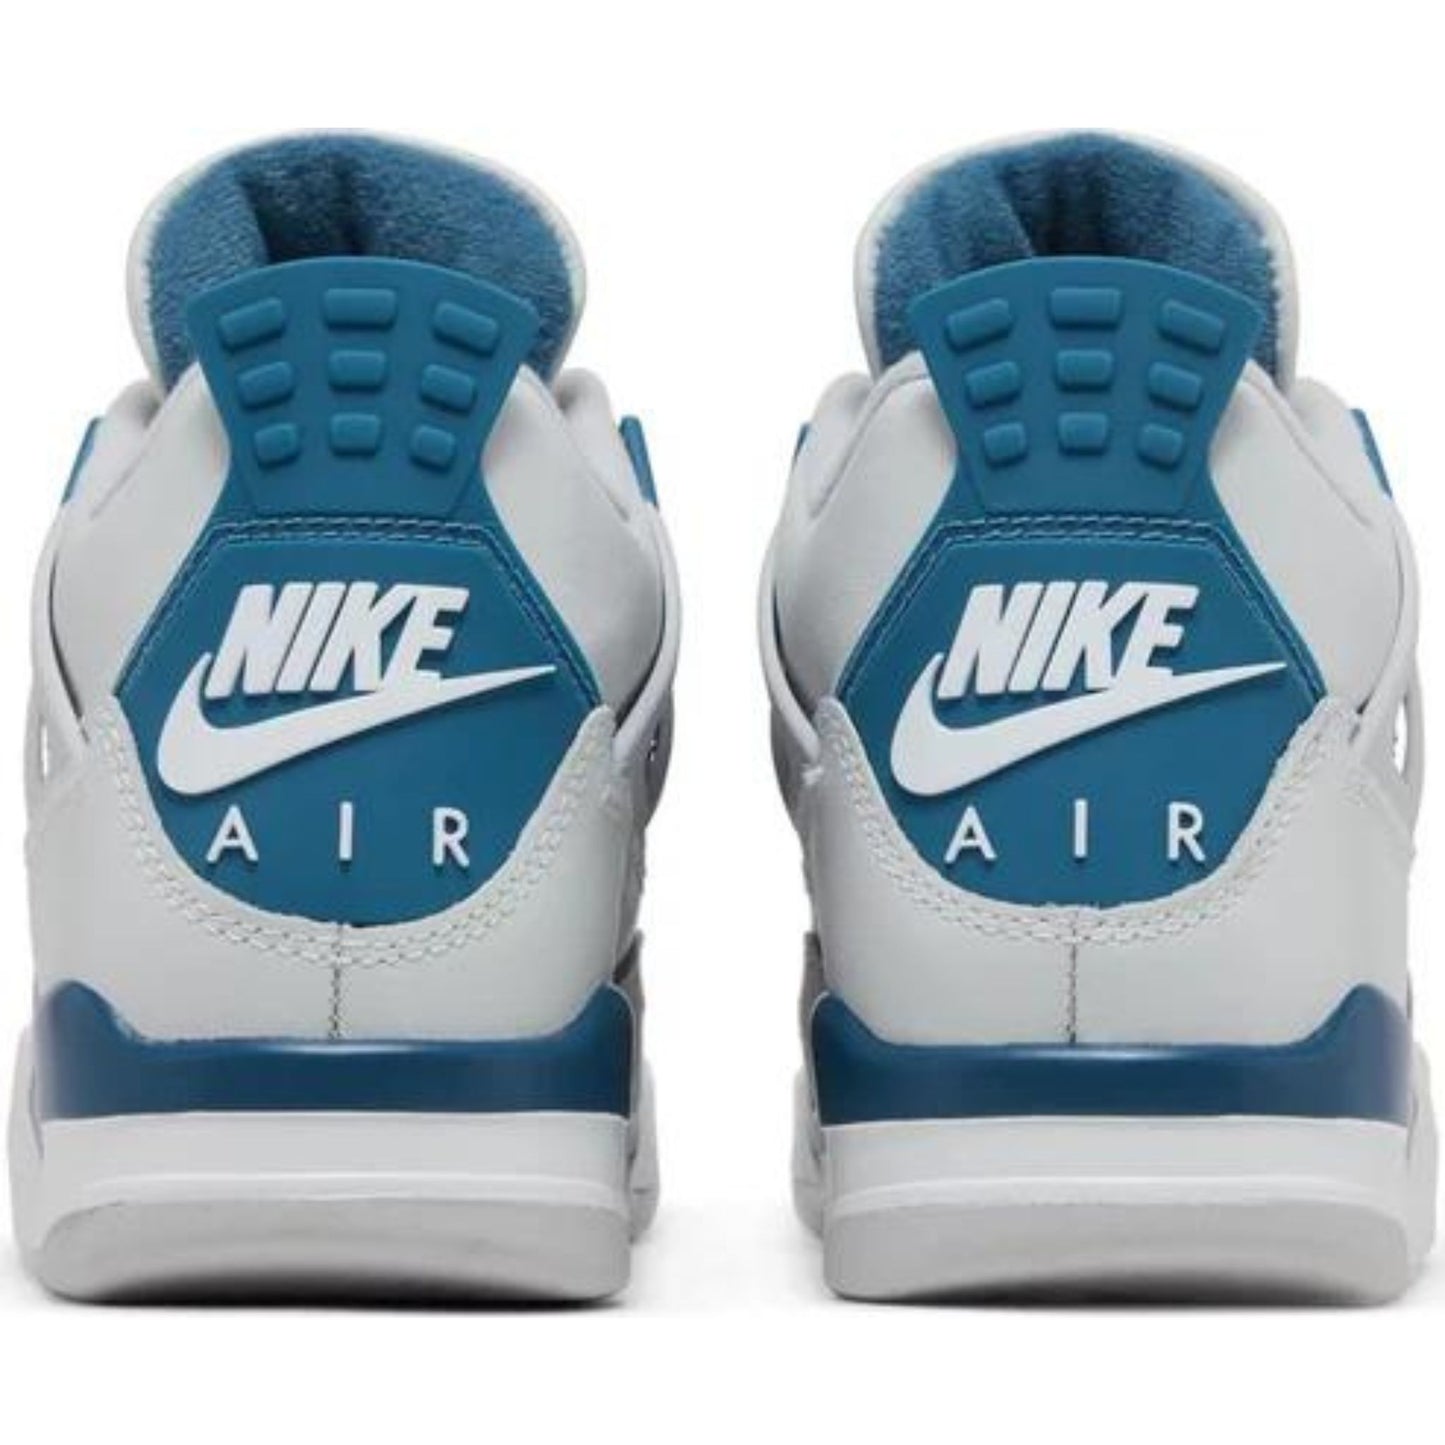 Nike Air Jordan 4 Retro White Blue: Iconic sneakers featuring a white and blue color scheme.